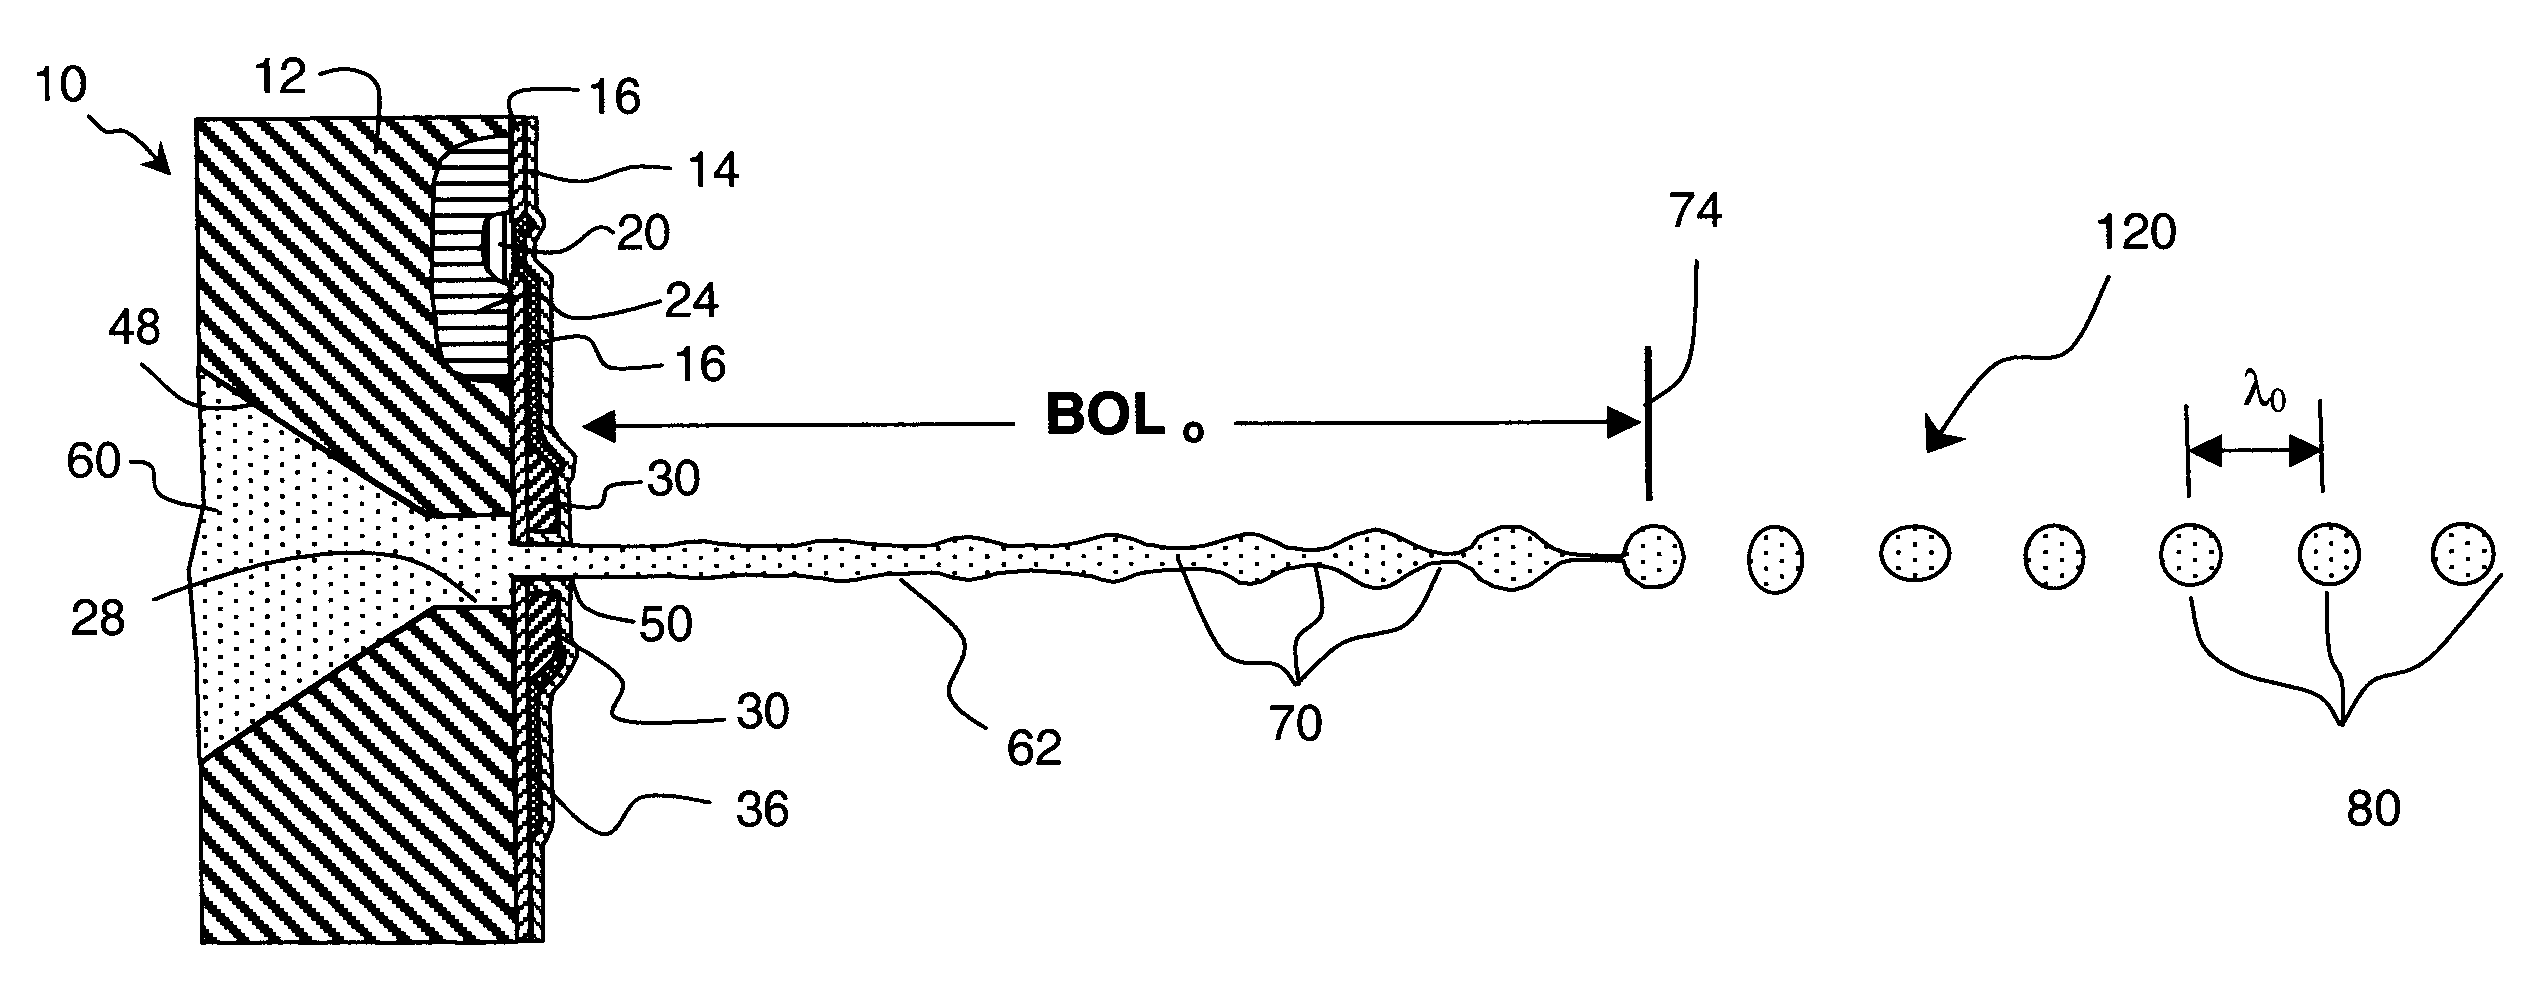 Continuous drop emitter with reduced stimulation crosstalk